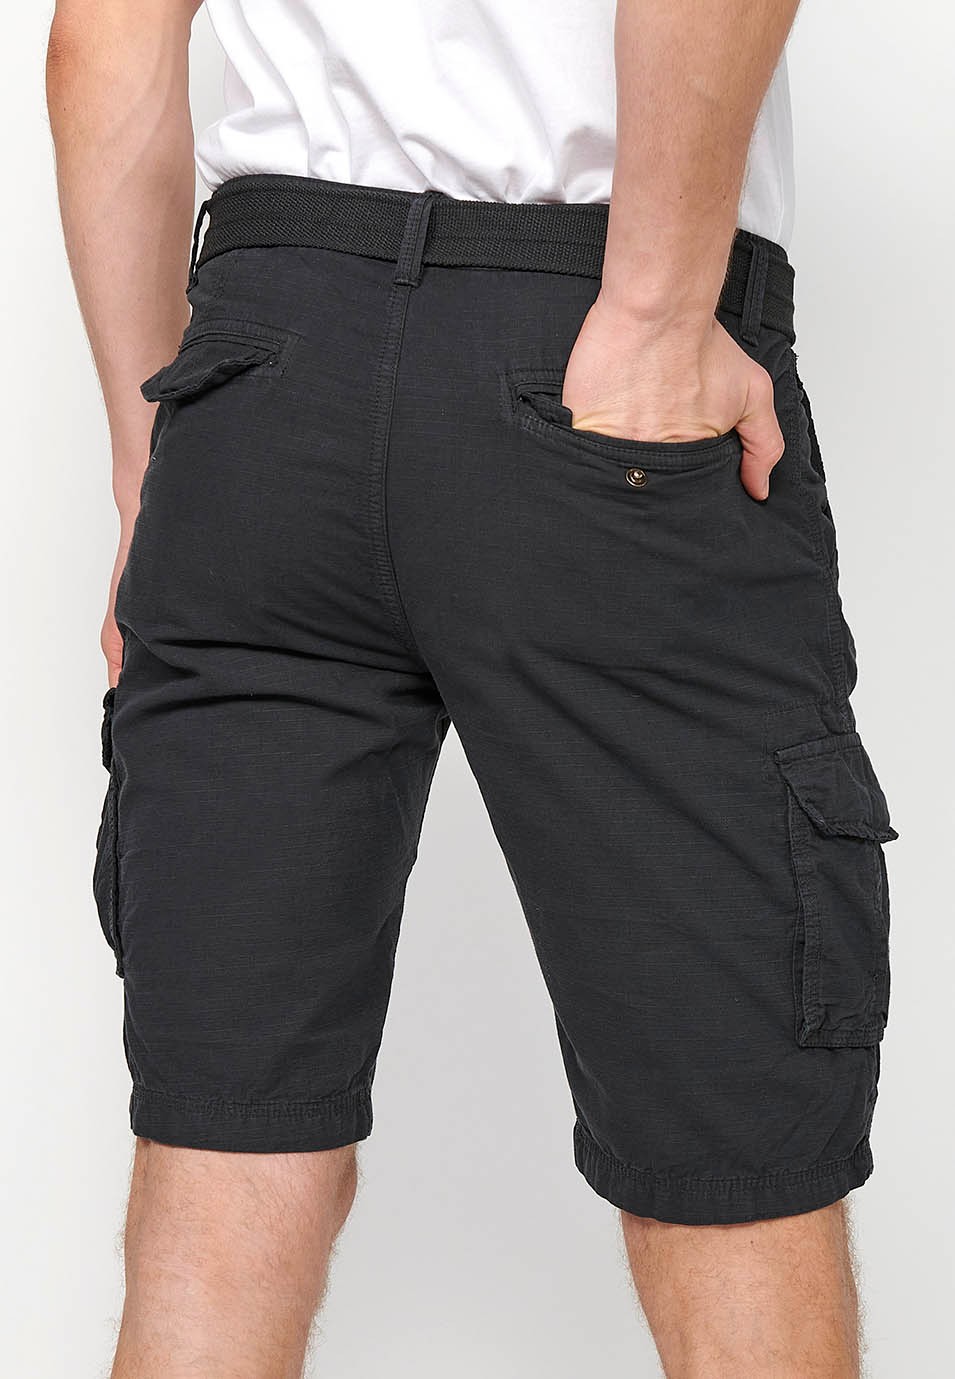 Cotton Cargo Shorts with Belt and Front Closure with Zipper and Button with Pockets, Two Back Pockets with Flap and Two Black Cargo Pants for Men 7